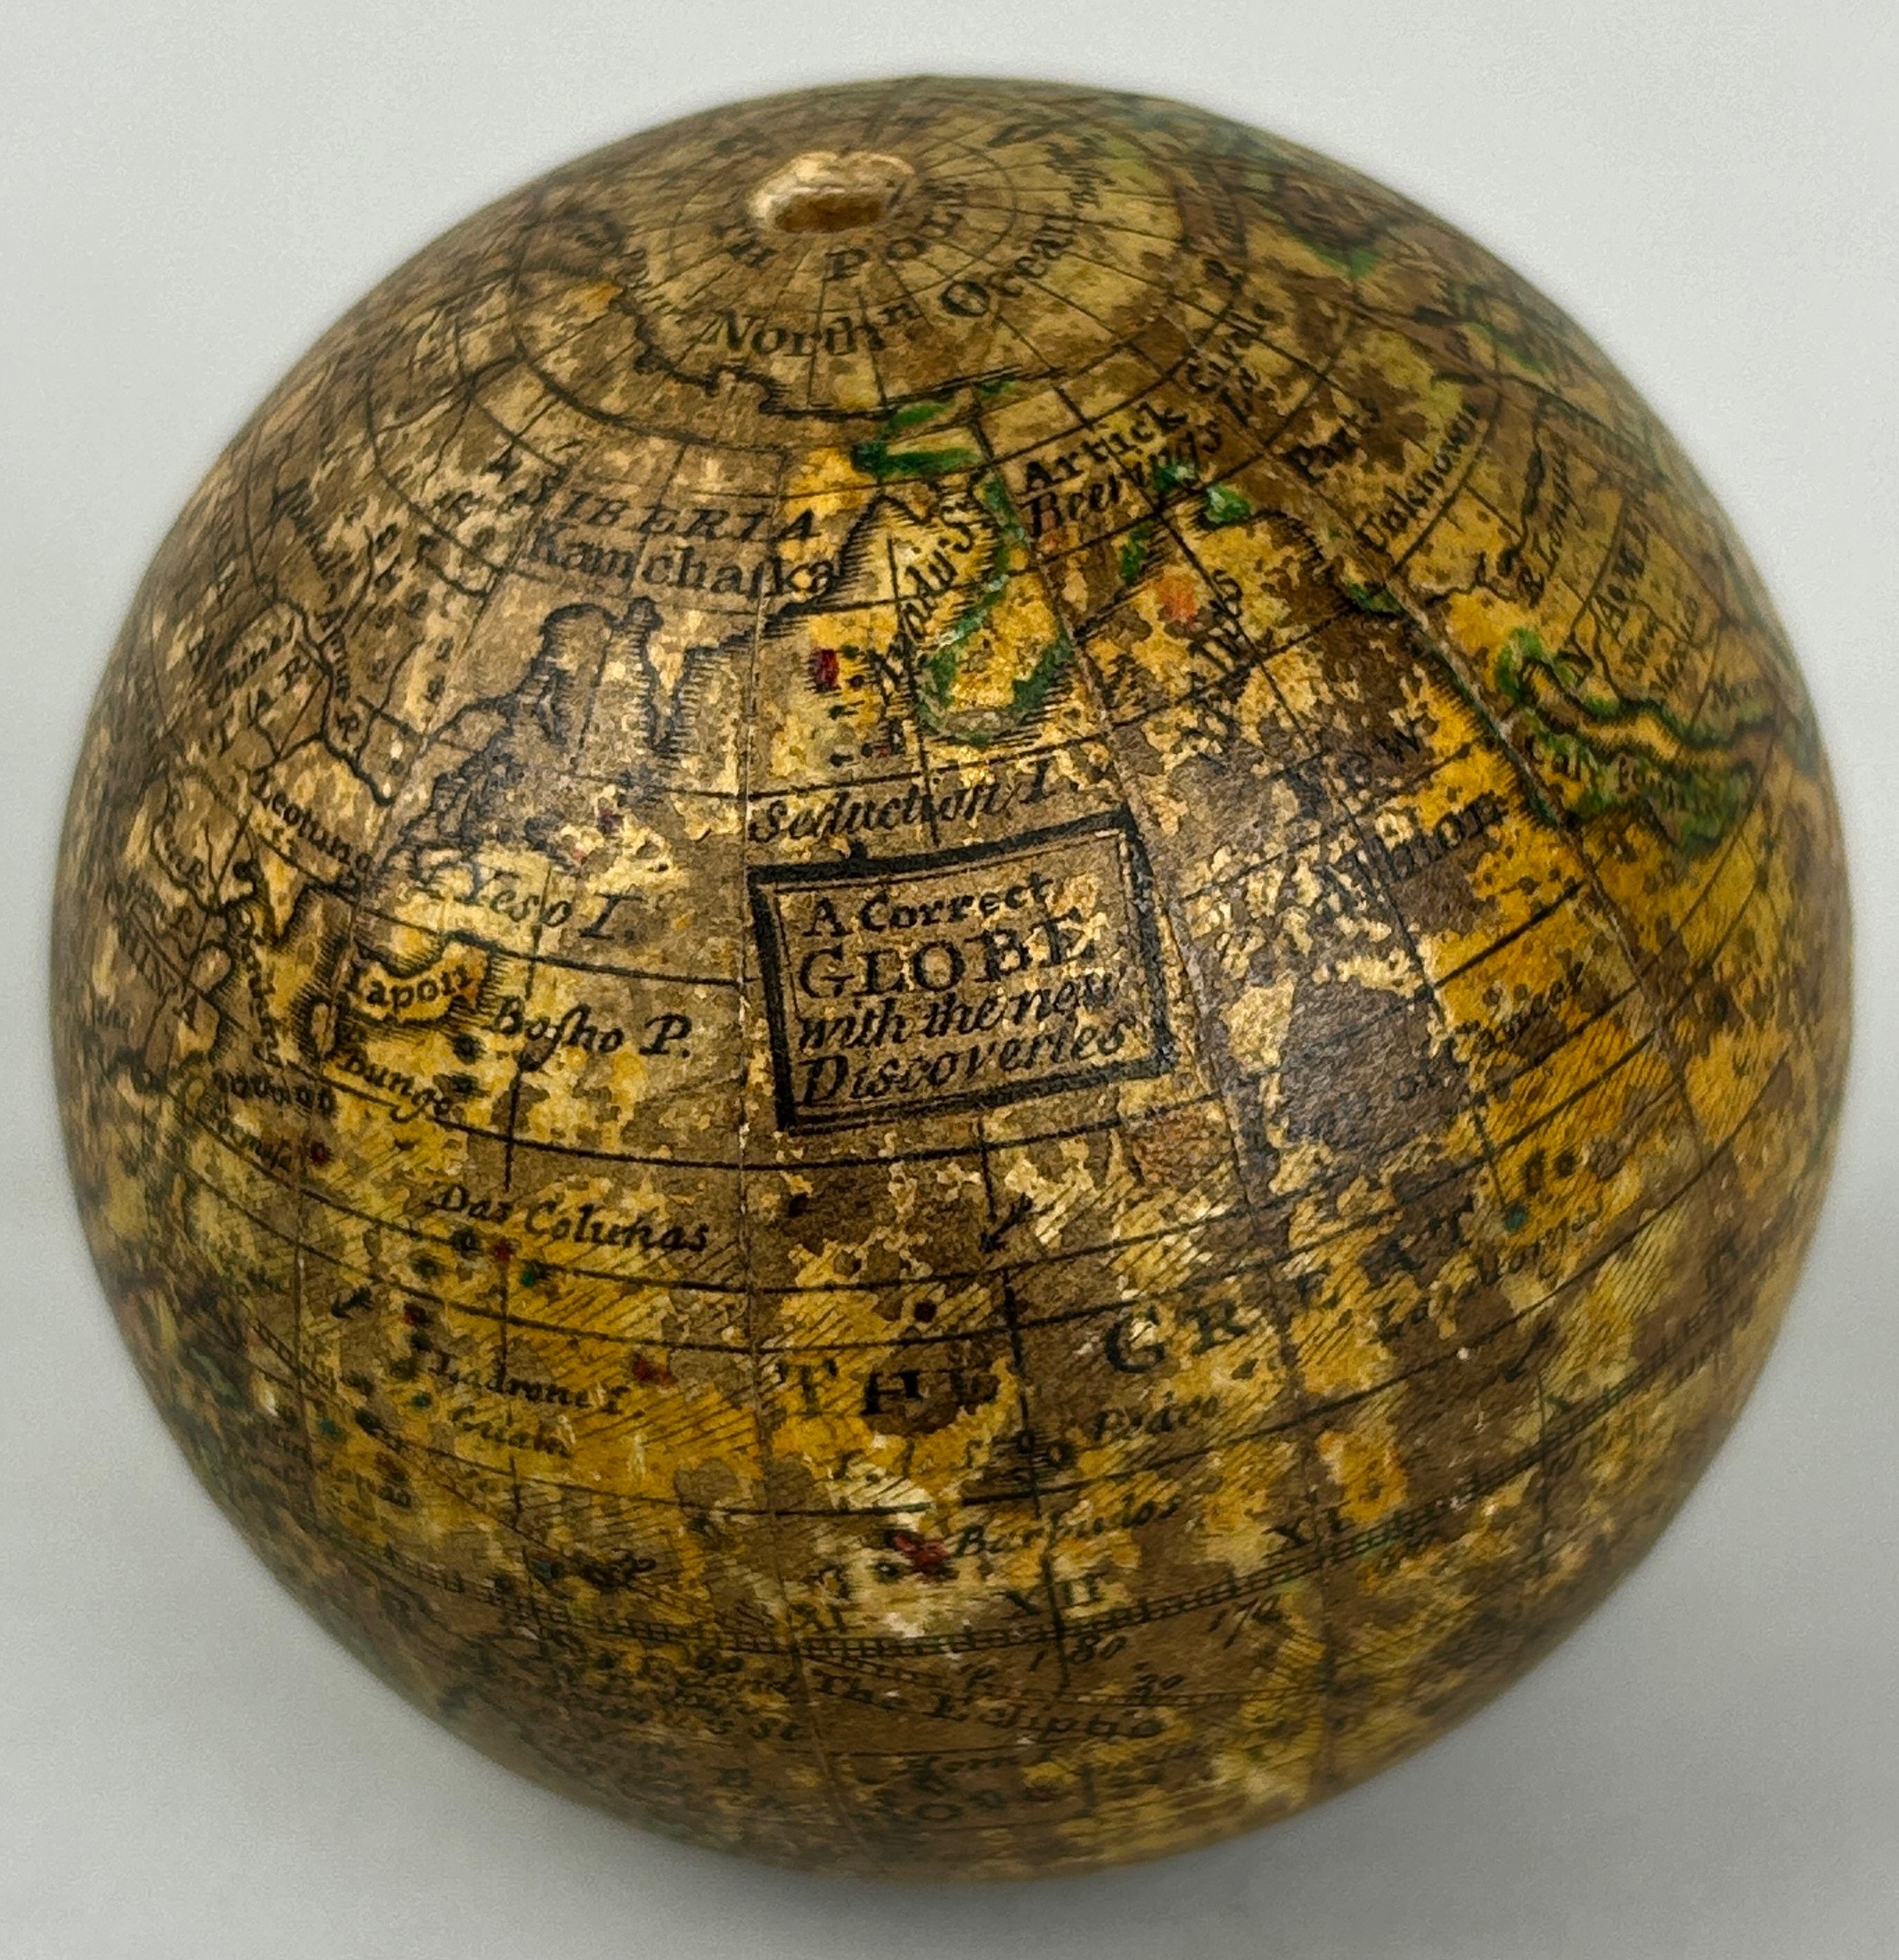 POCKET GLOBE: A CORRECT POCKET GLOBE WITH NEW INSTALLATIONS BY HALLEY AND CO CIRCA LATE 18TH CENTURY - Image 9 of 18